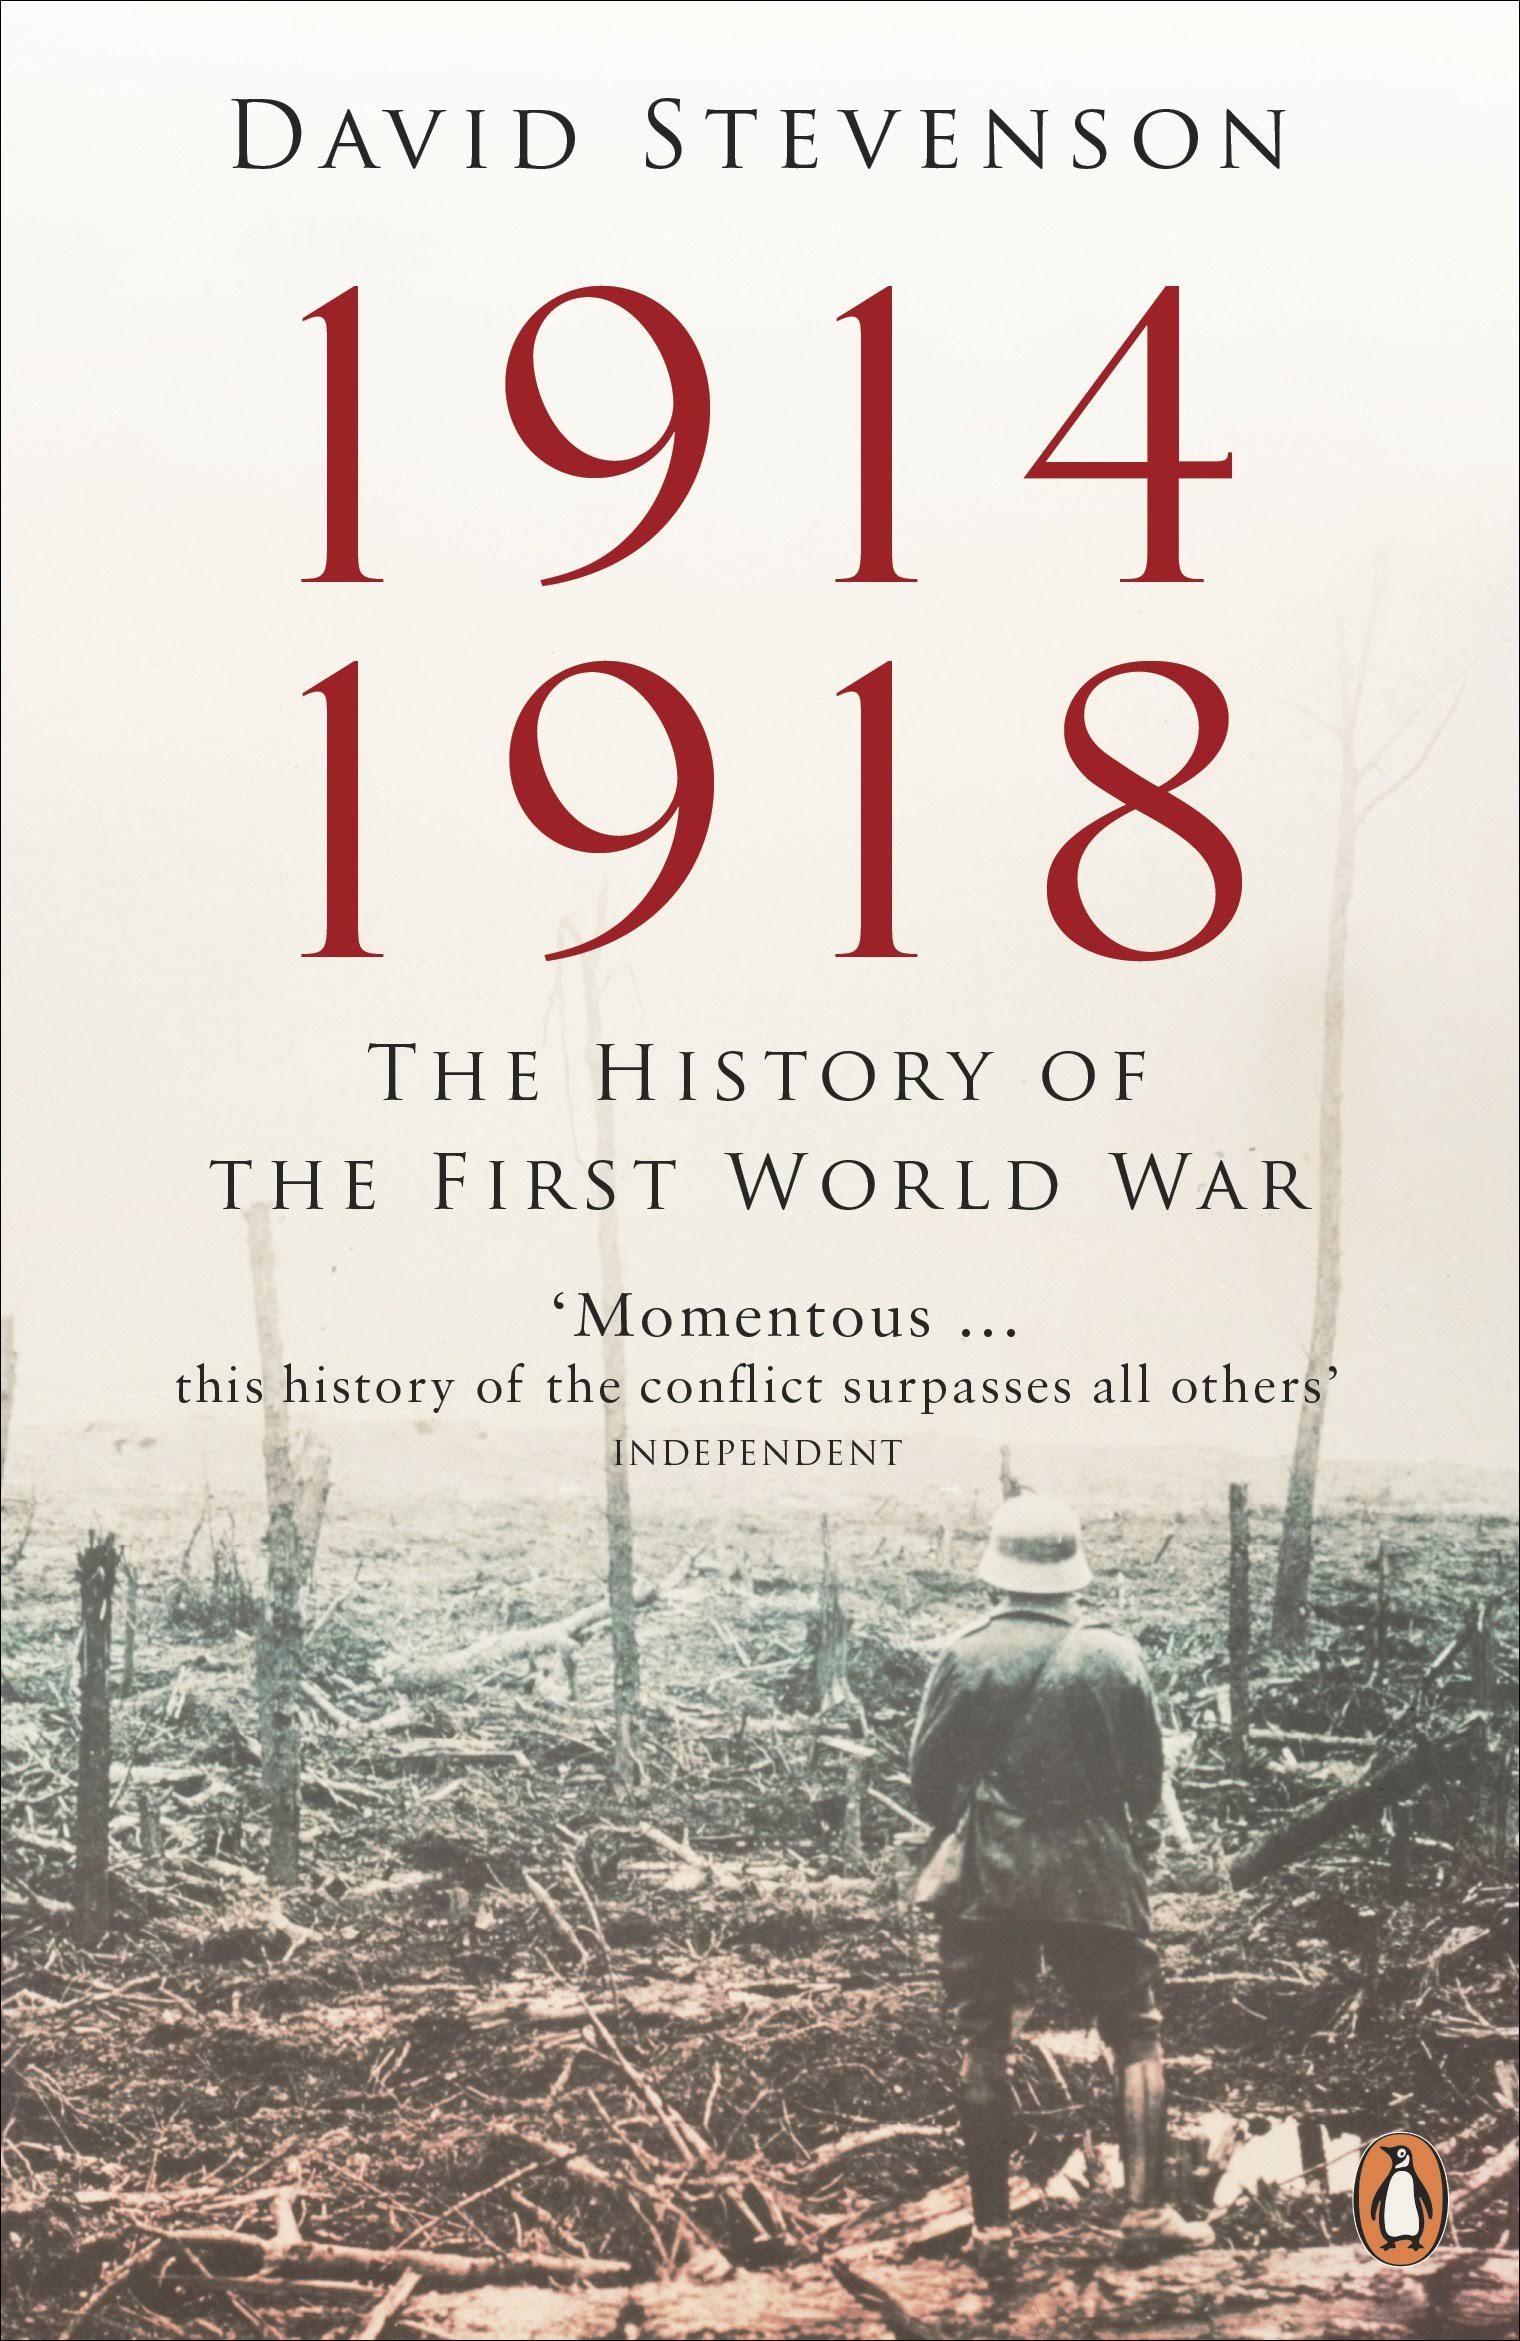 1914-1918: The History of the First World War [Book]